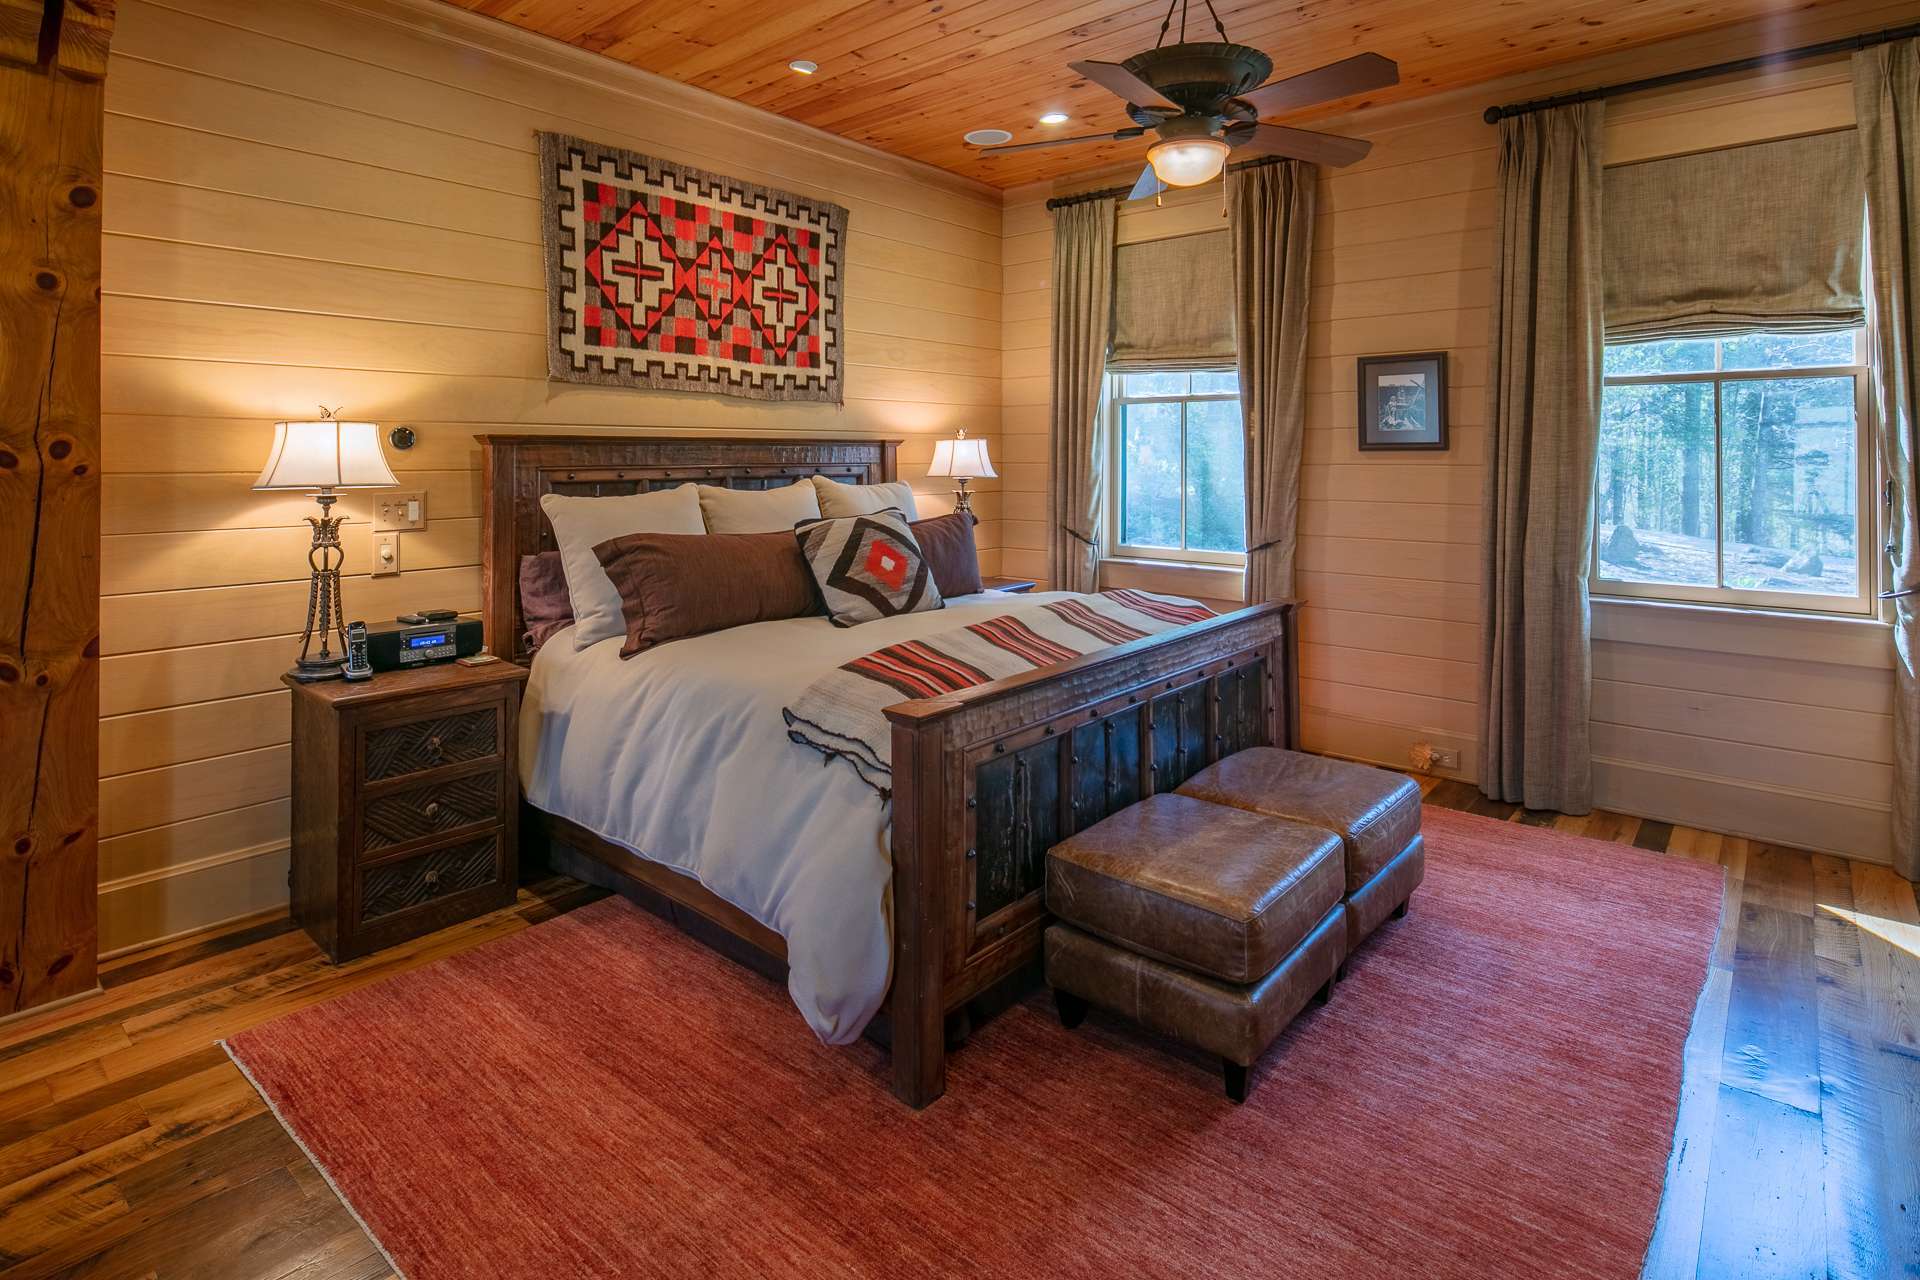 The master suite is situated on the main level and is its own mini-sanctuary, complete with another stacked stone fireplace, sitting area, refreshment station, spacious walk-in closet and its own covered porch.